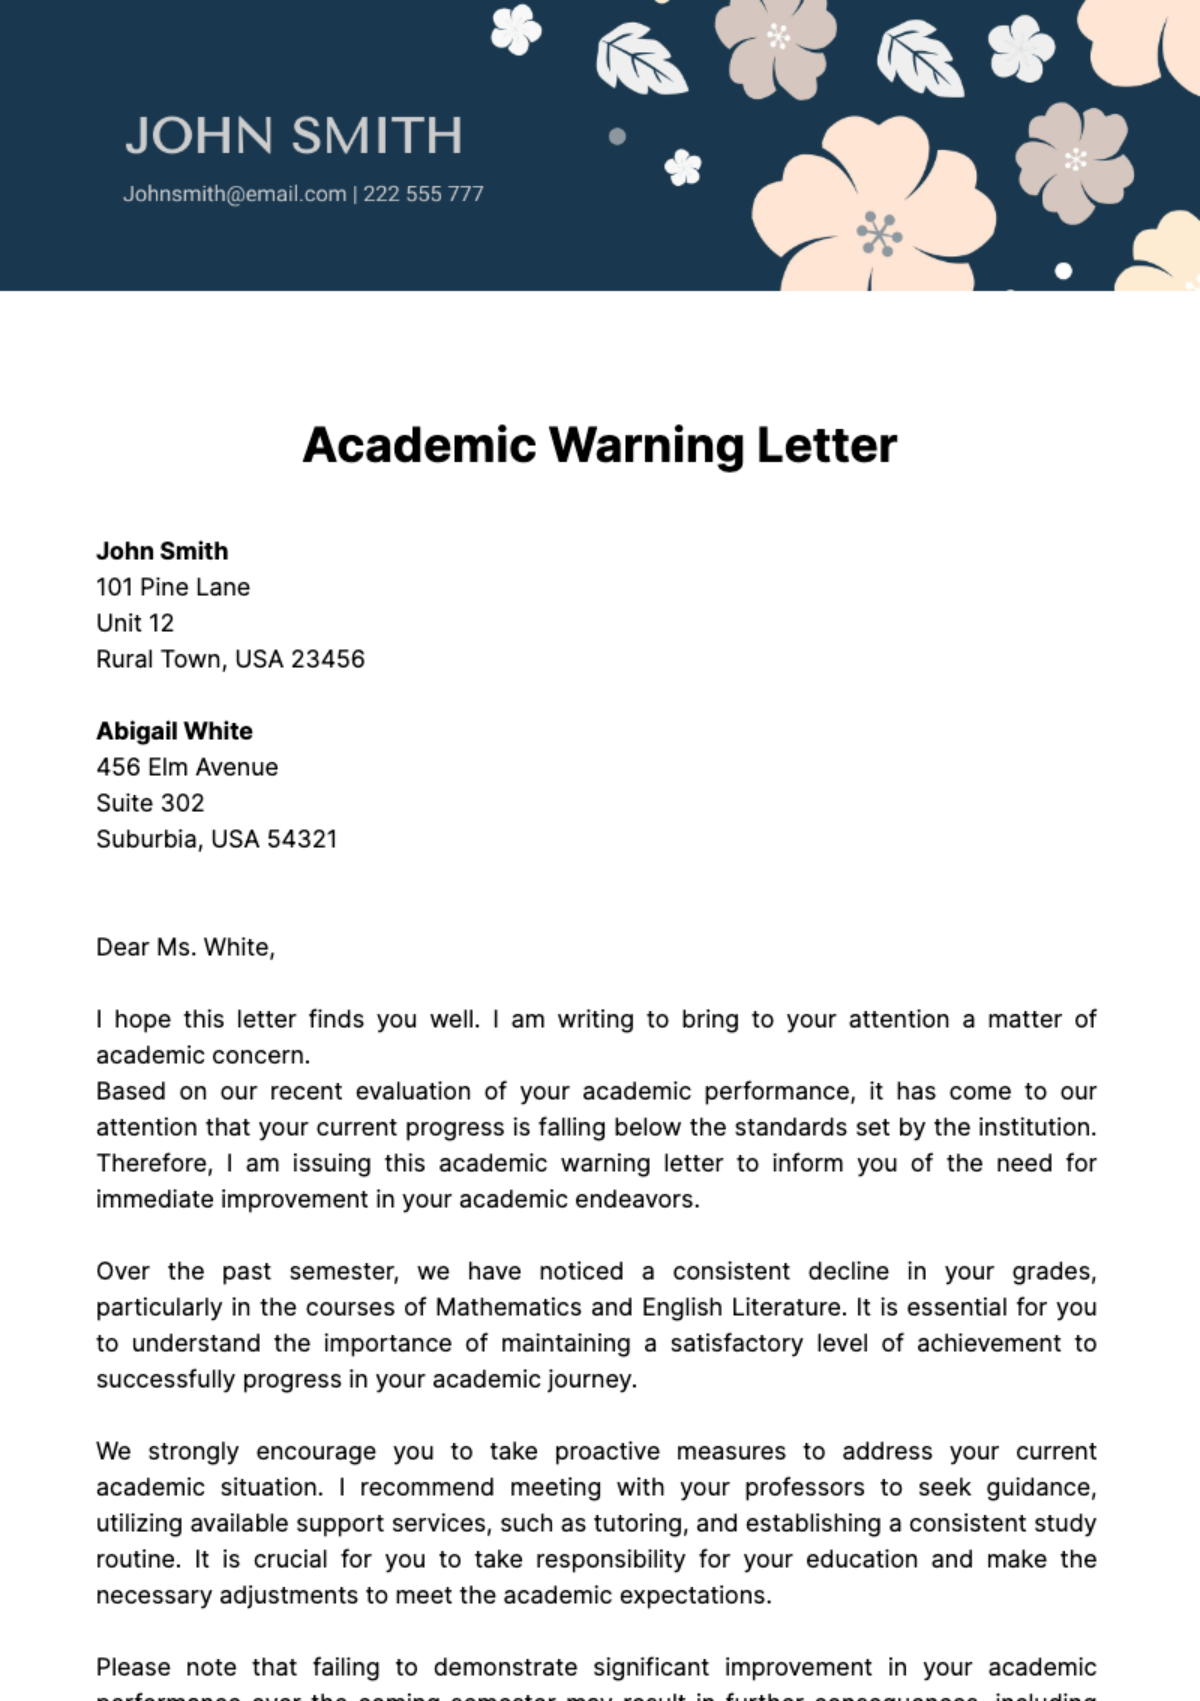 Academic Warning Letter Template